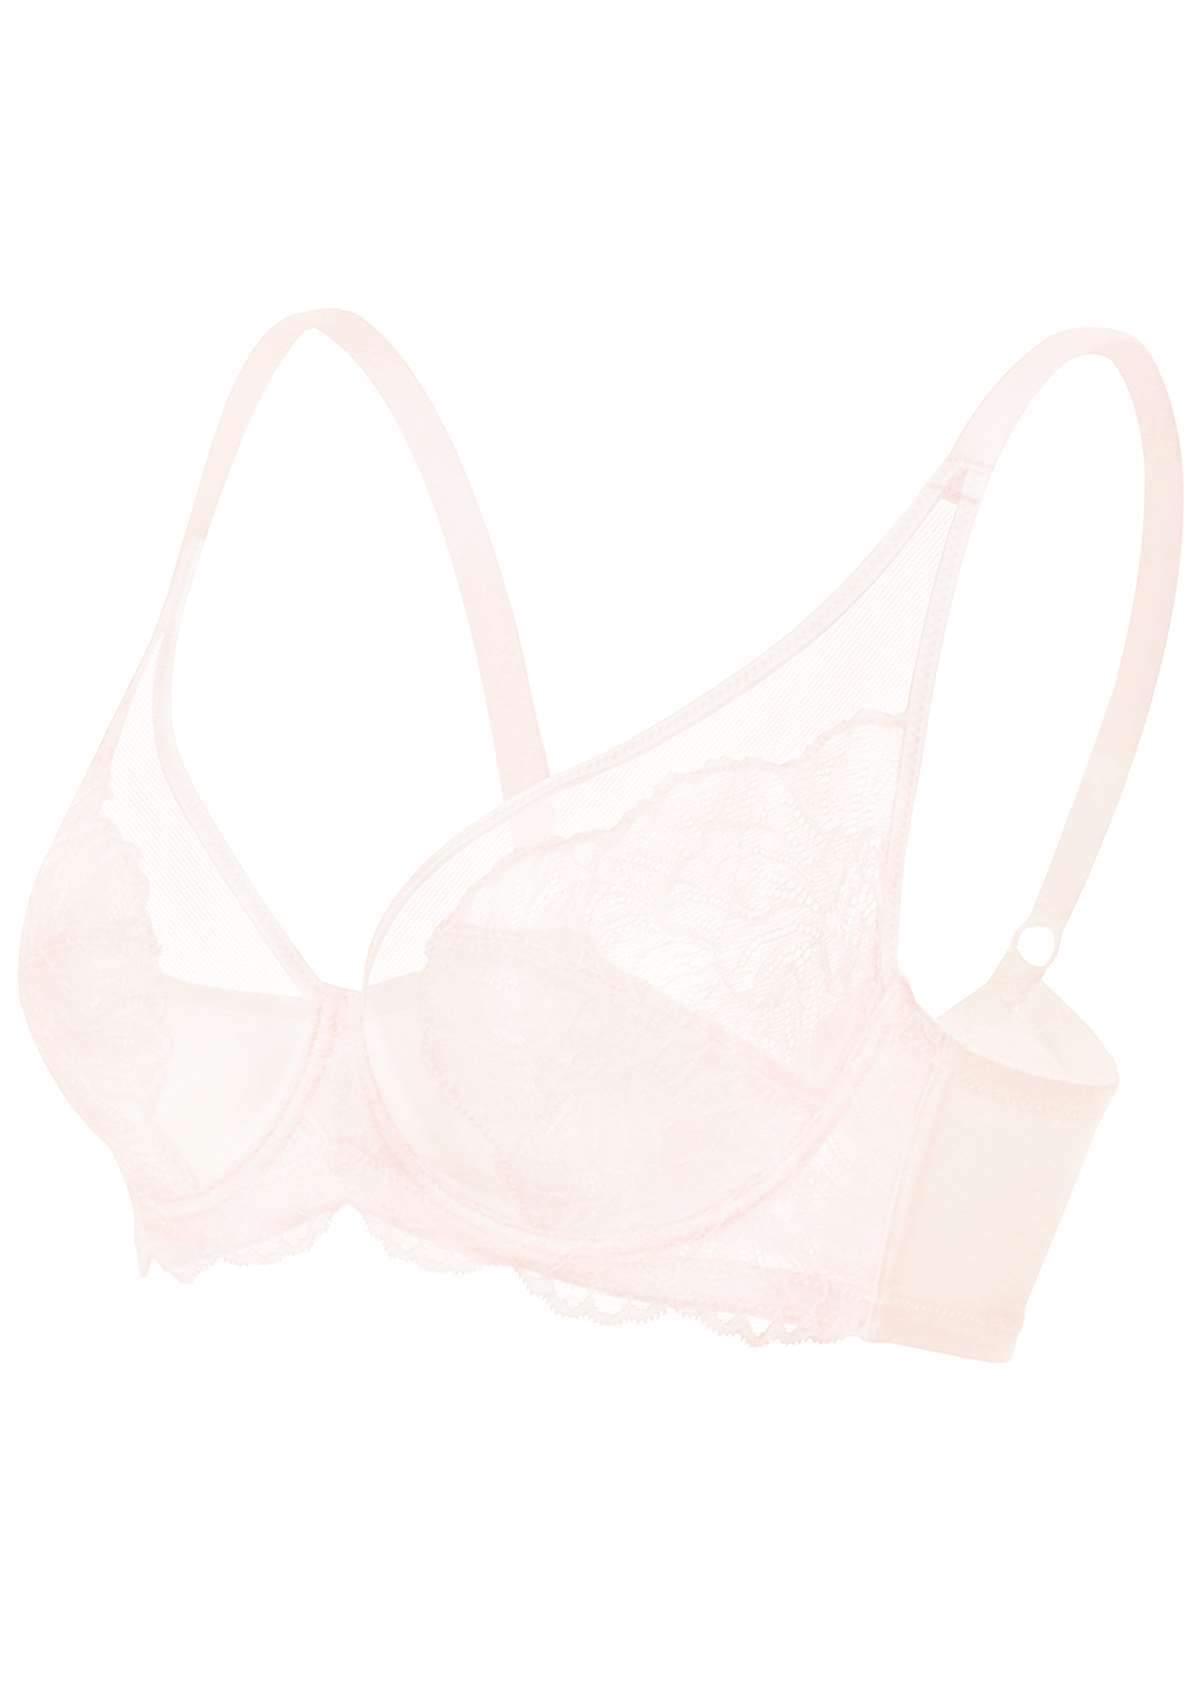 HSIA Blossom Matching Lacey Underwear And Bra Set: Sexy Lace Bra - Dusty Peach / 36 / D